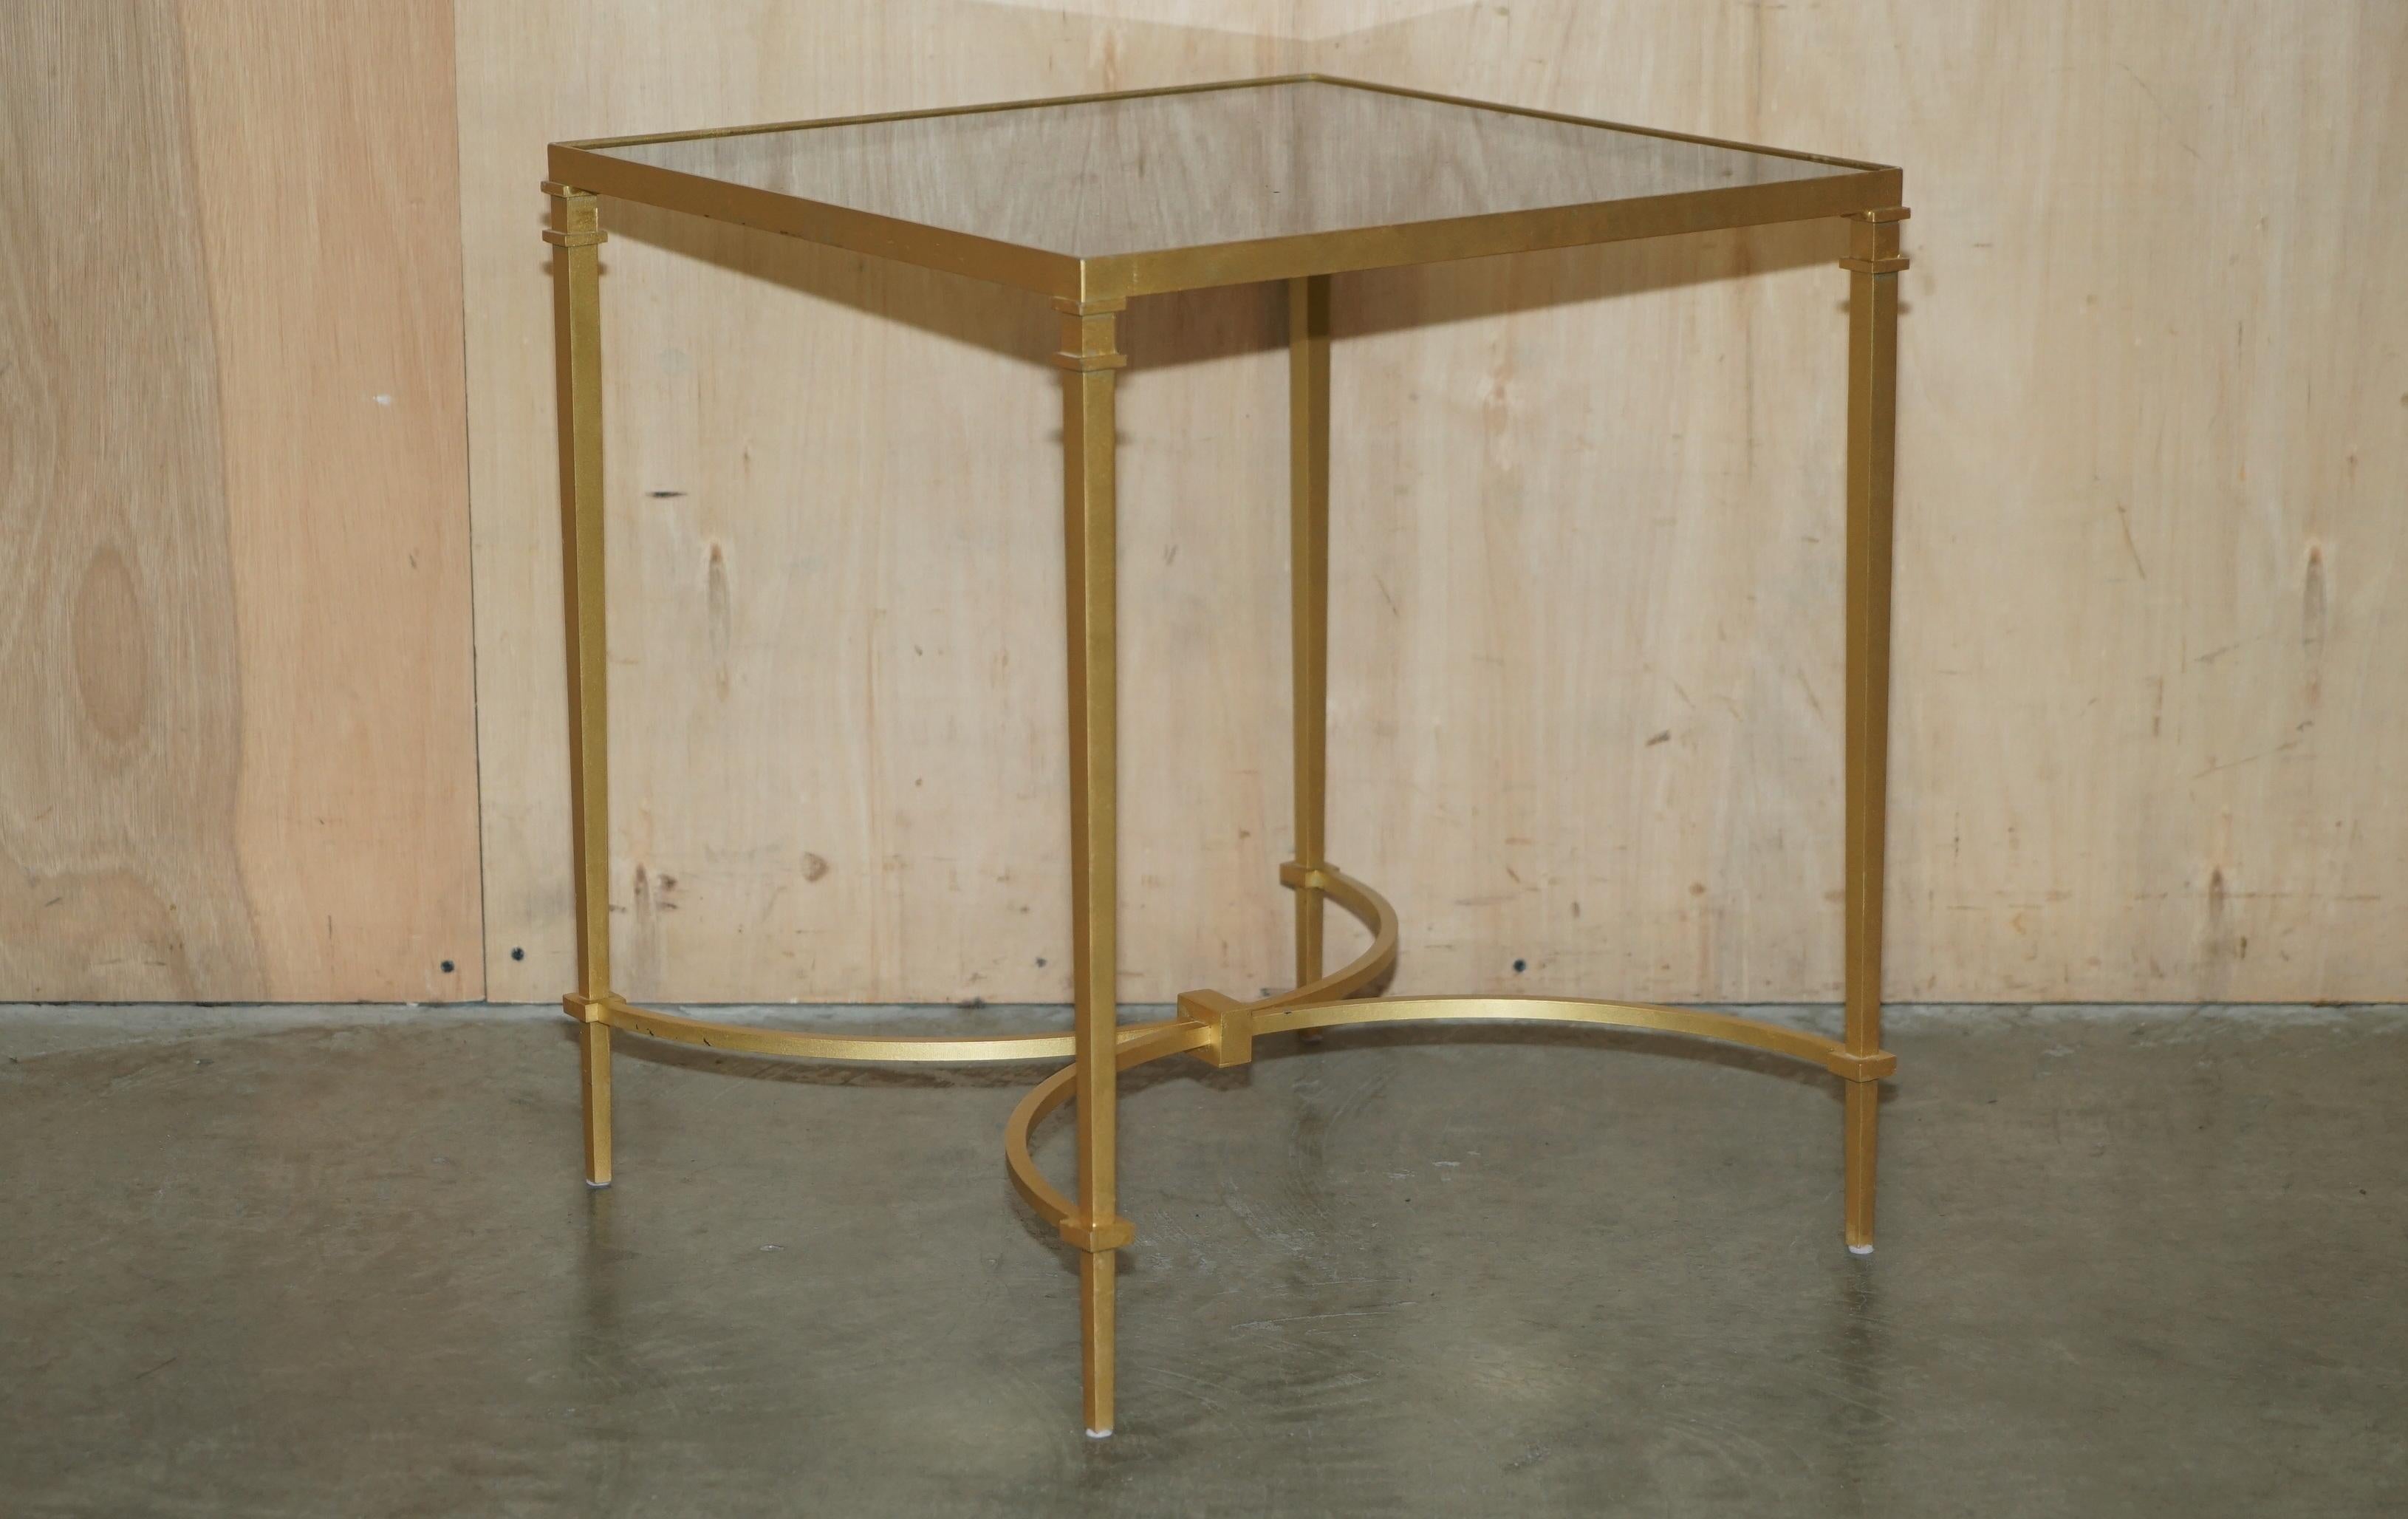 Royal House Antiques

Royal House Antiques is delighted to offer for sale this Stunning Maison Jansen style vintage circa 1970's brass side table with marble top

Please note the delivery fee listed is just a guide, it covers within the M25 only for